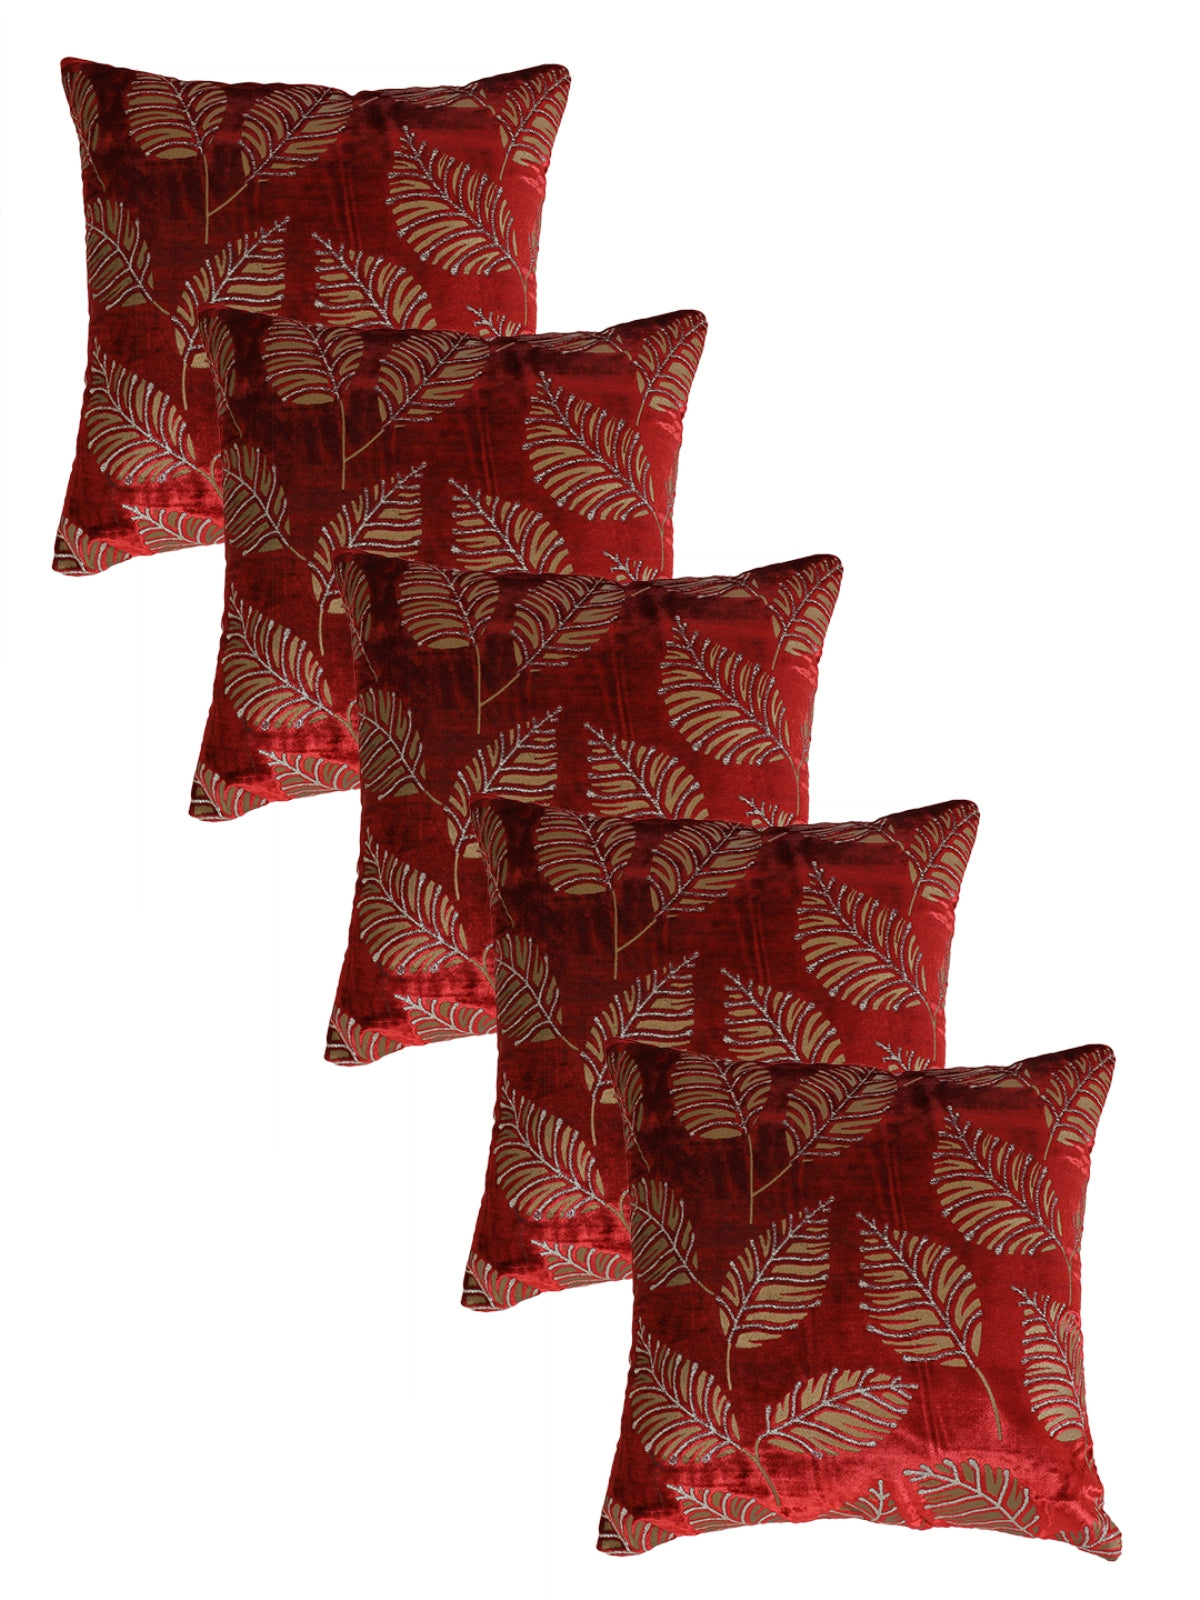 Maroon Set of 5 Velvet 16 Inch x 16 Inch Cushion Covers